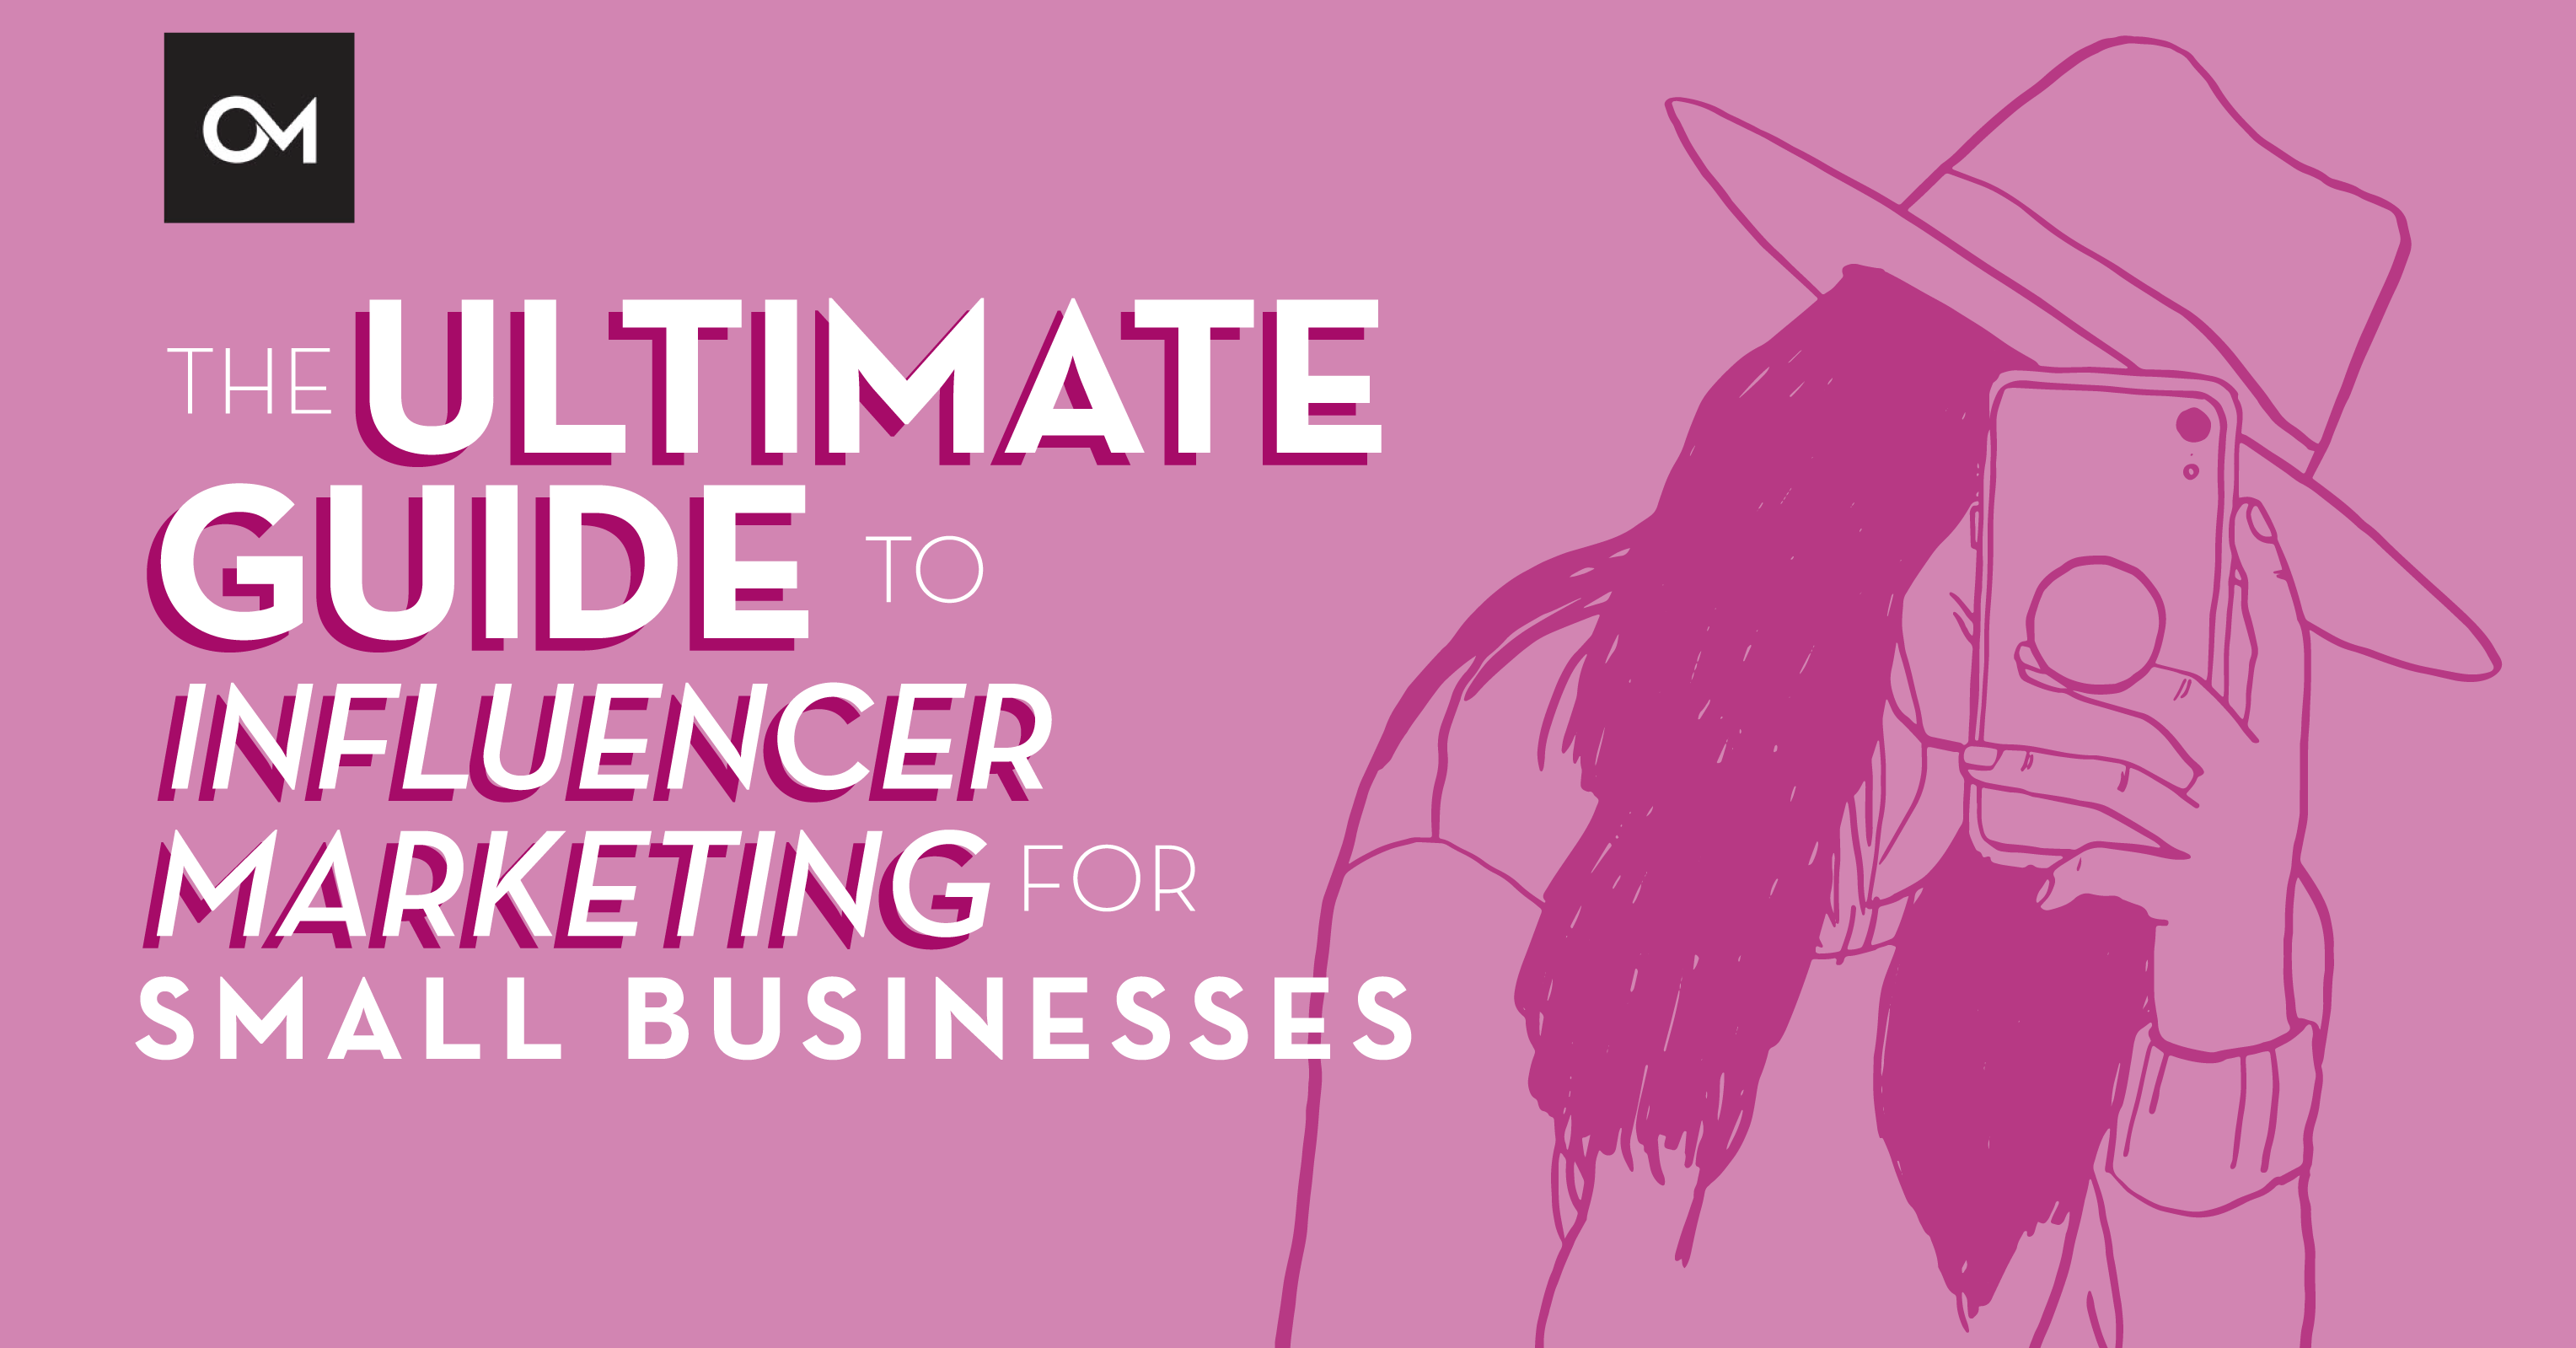 The Ultimate Guide to Influencer Marketing for Small Businesses